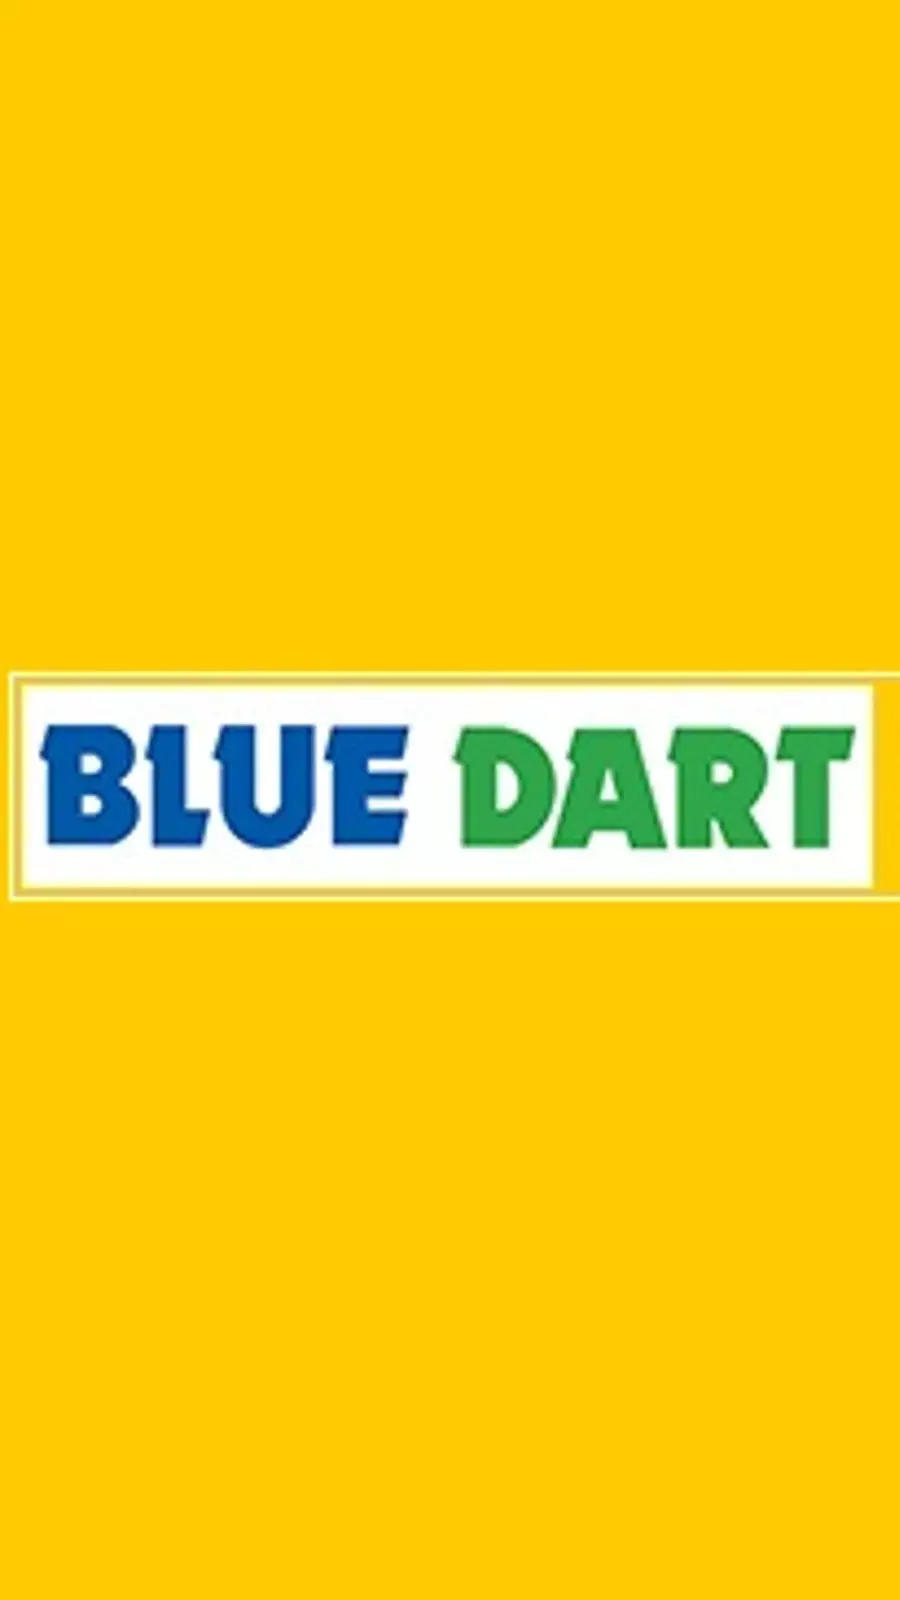 Blue dart coimbatore by Ask Me - Issuu